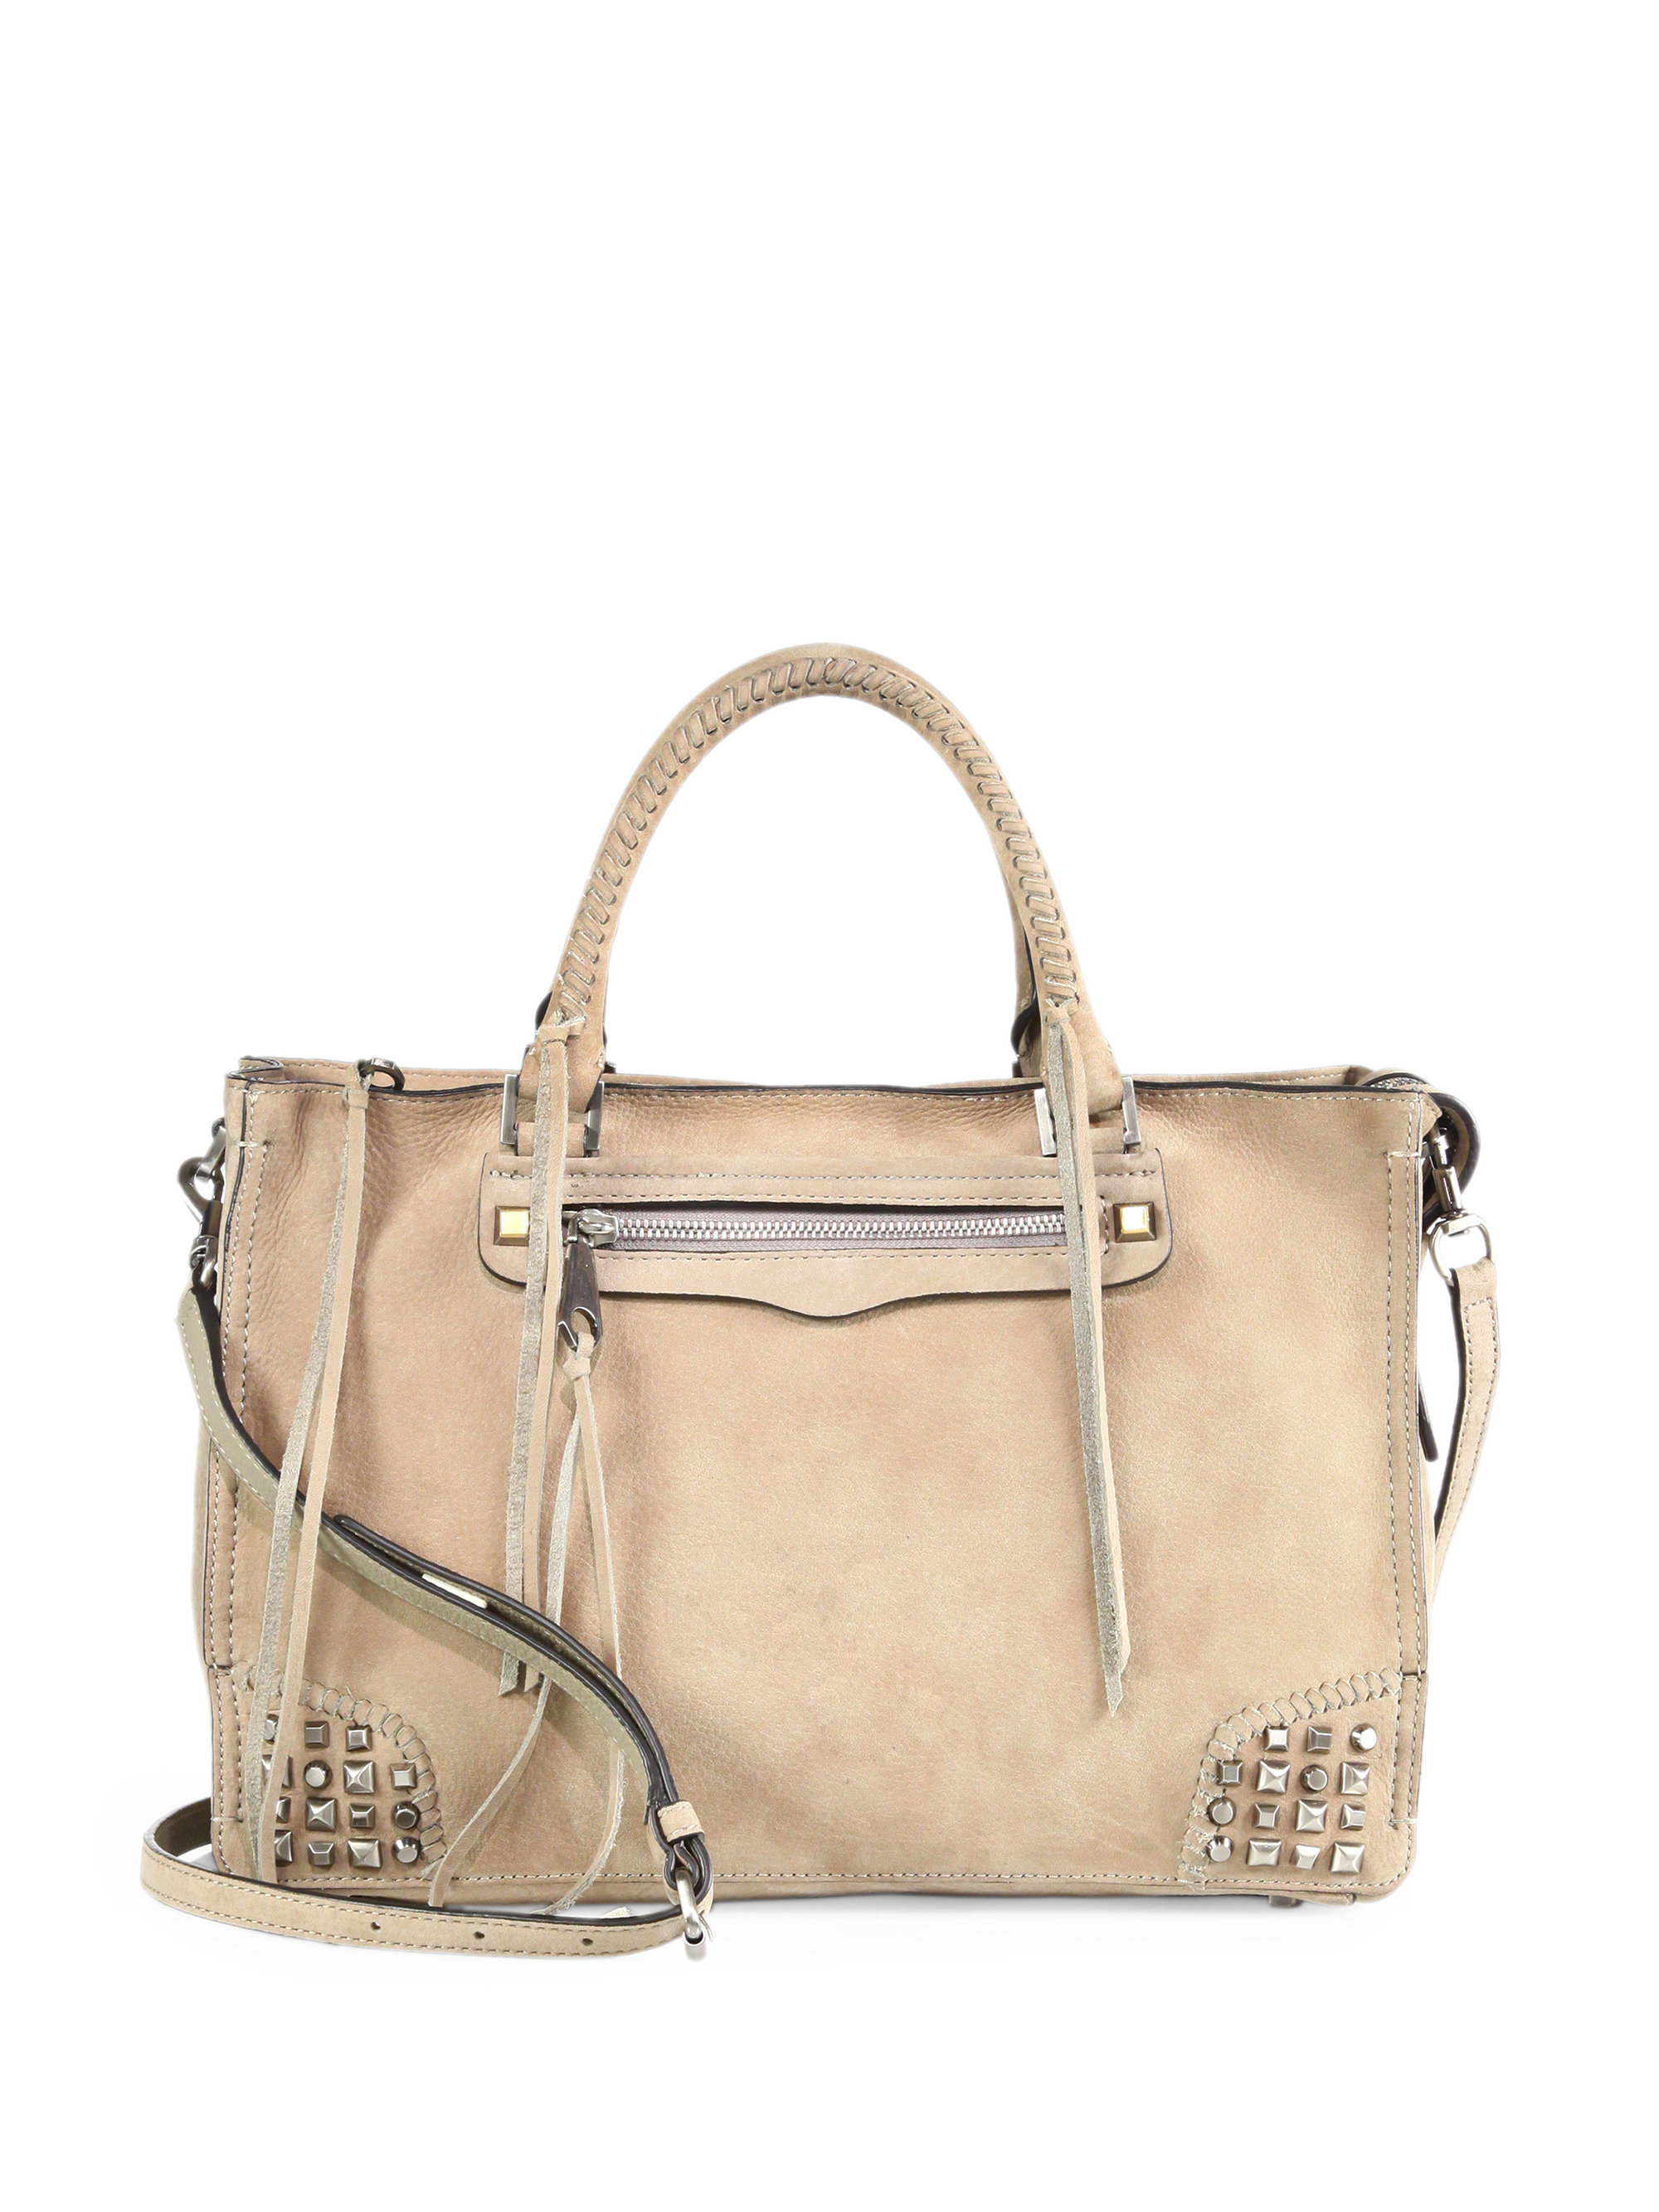 Rebecca Minkoff Small Amorous Satchel in Natural - Lyst